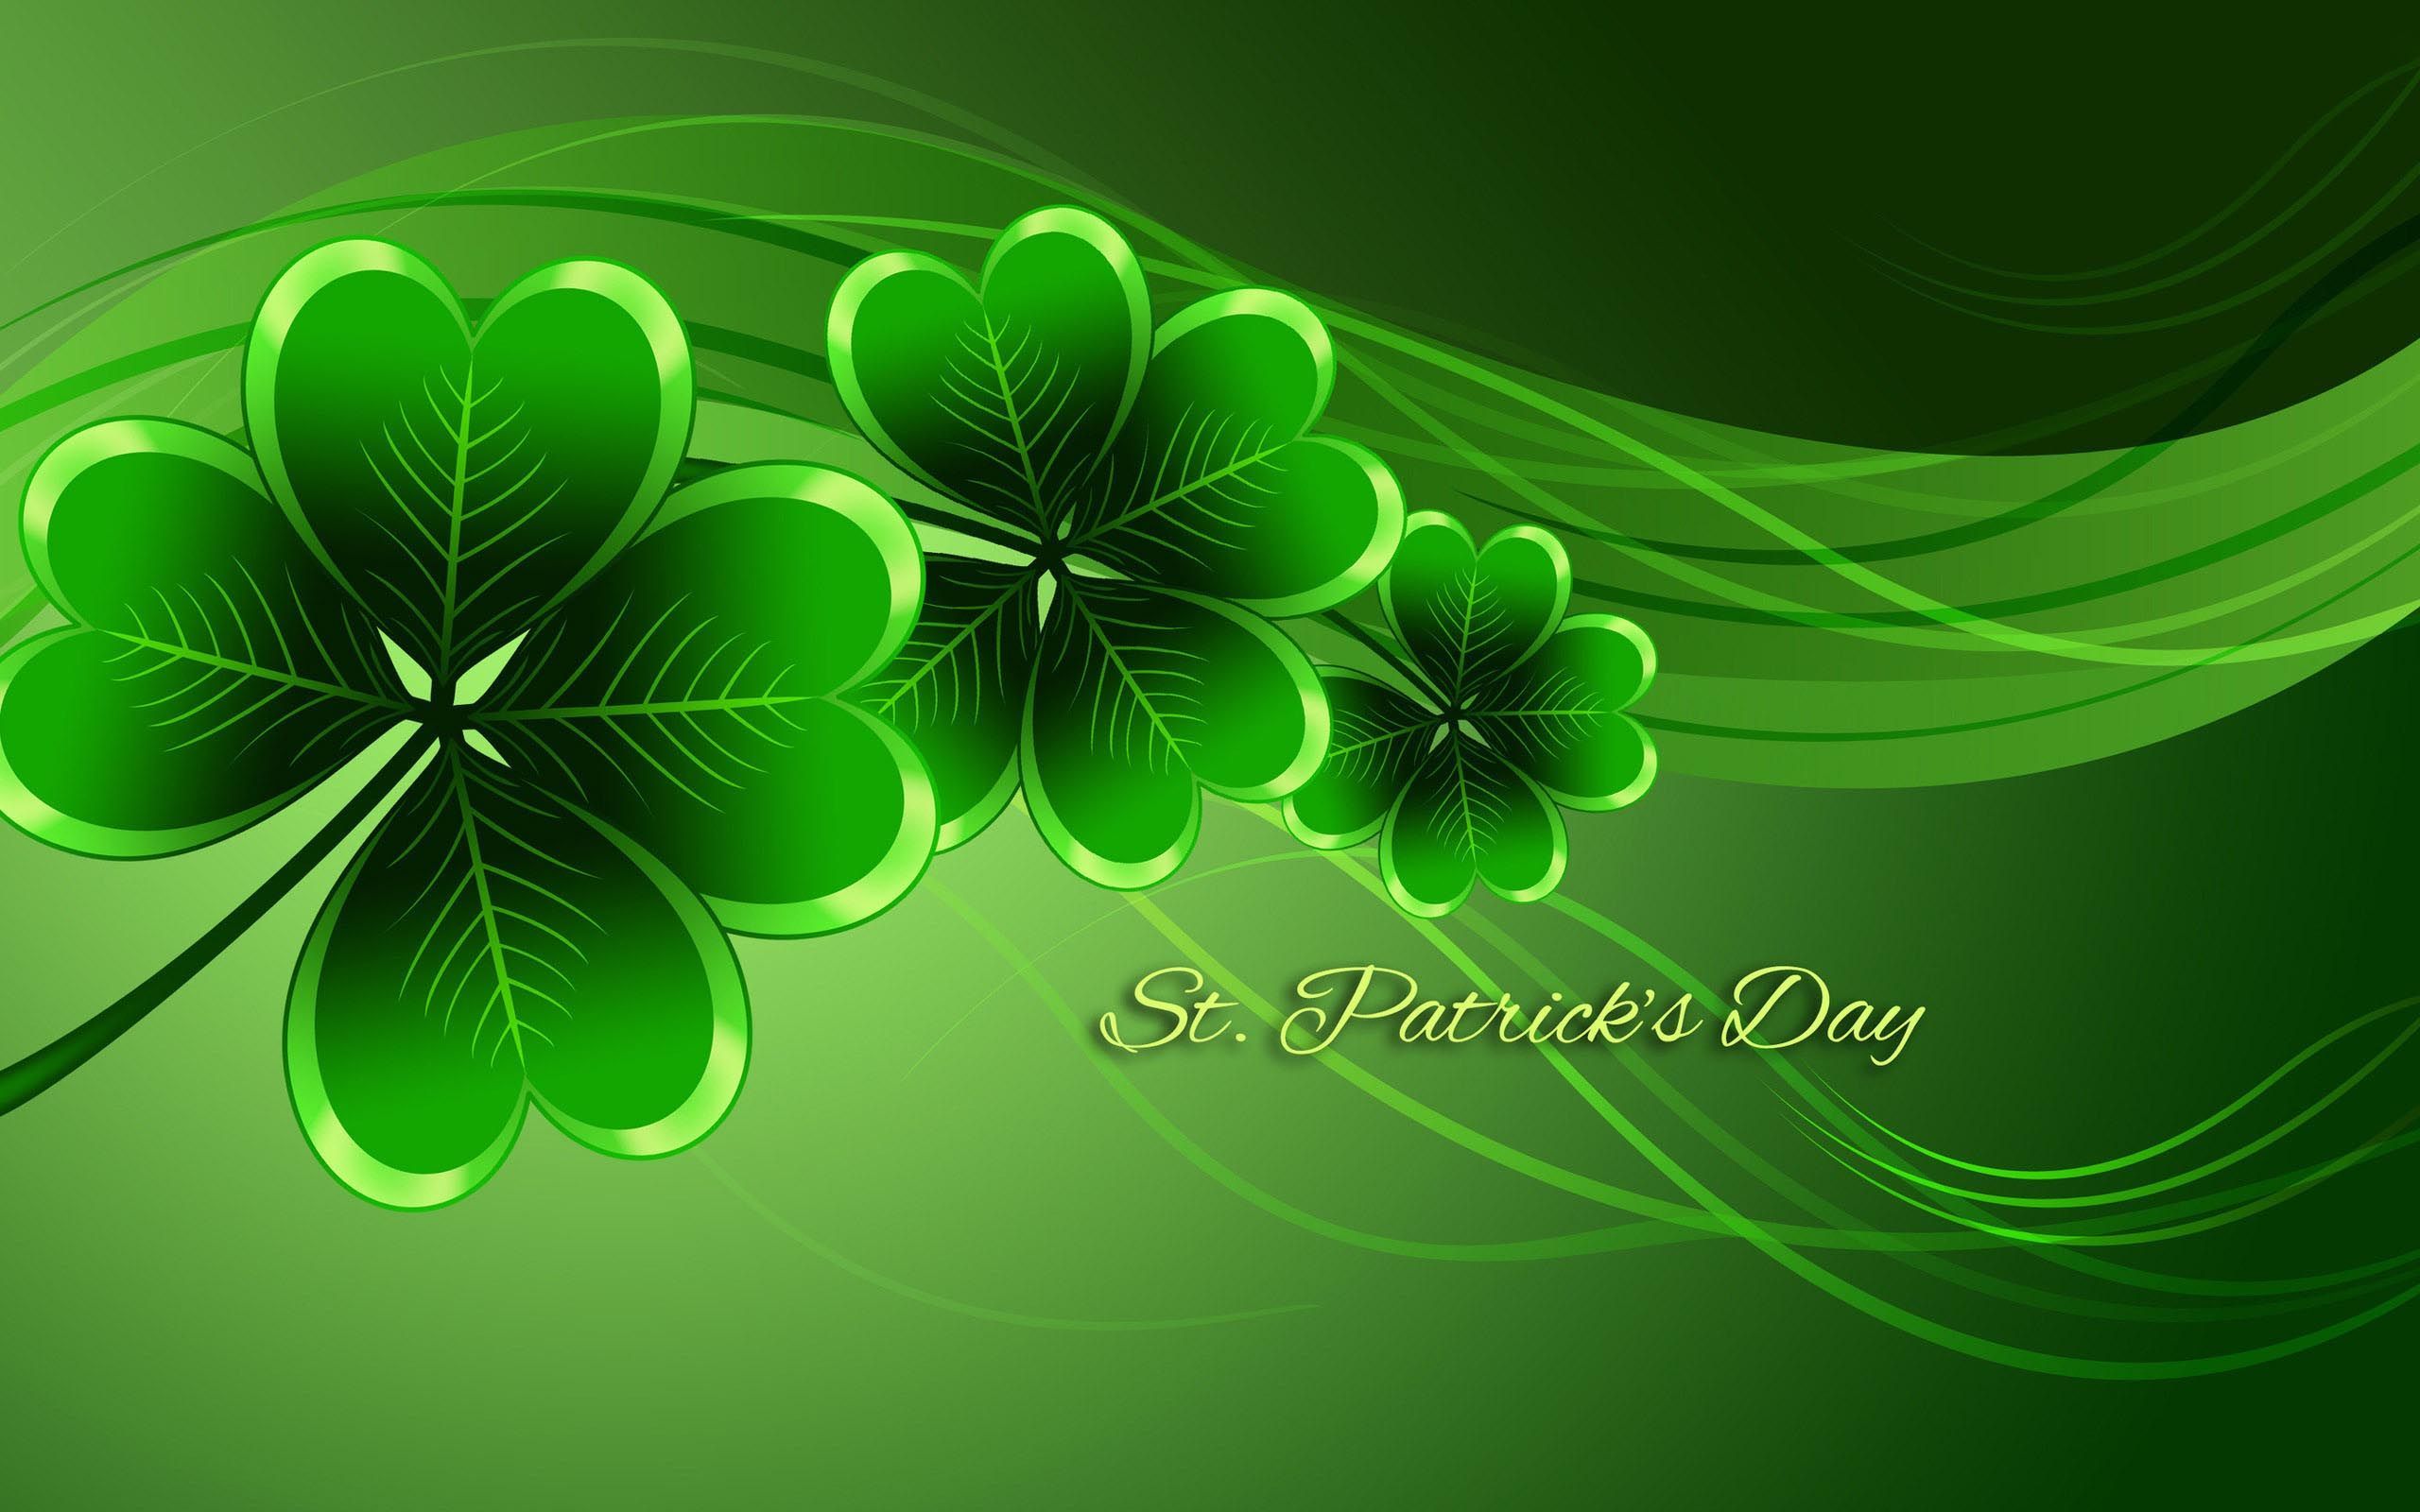 Happy St Patrick's Day CoolWallpaper 2880×1800. Cool PC Wallpaper. St patricks day picture, St patricks day wallpaper, St patricks day